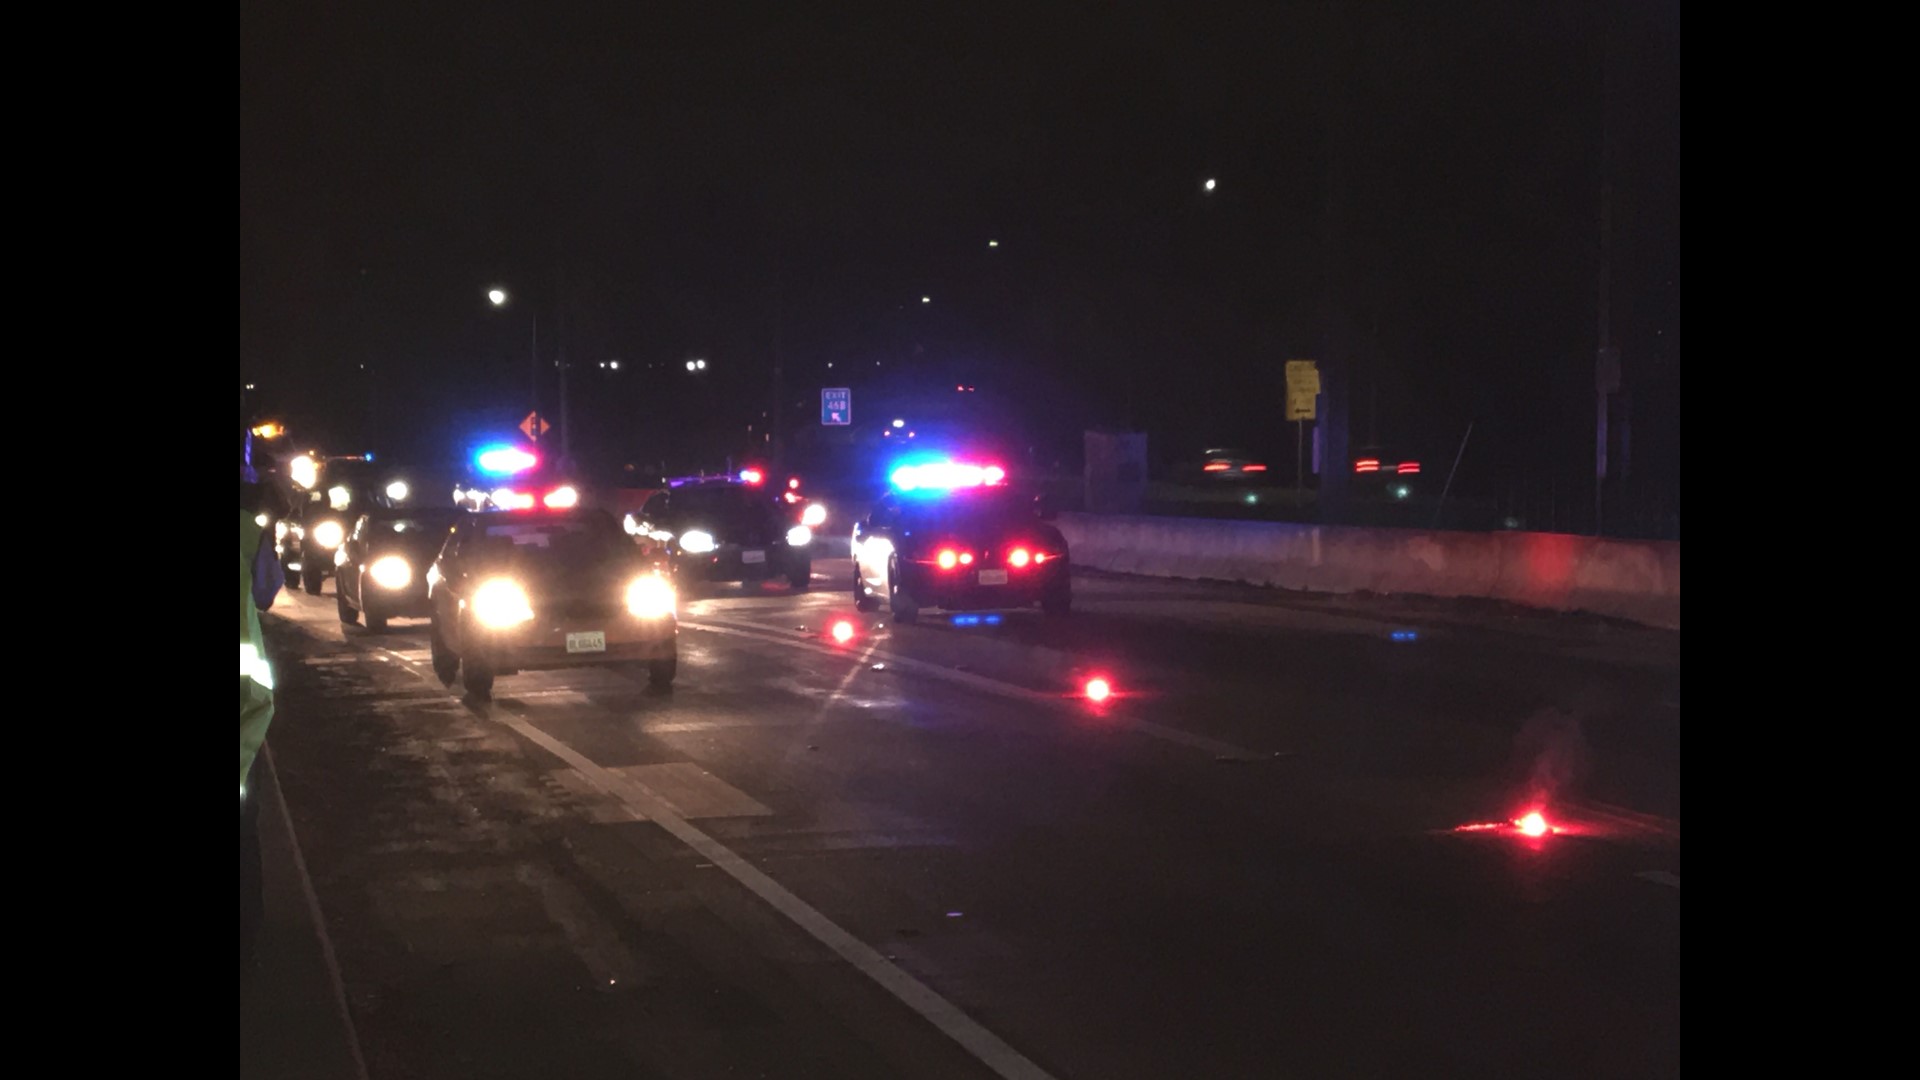 CHP officials say after the woman fell from the moving vehicle, she was struck by another car on Highway 160.